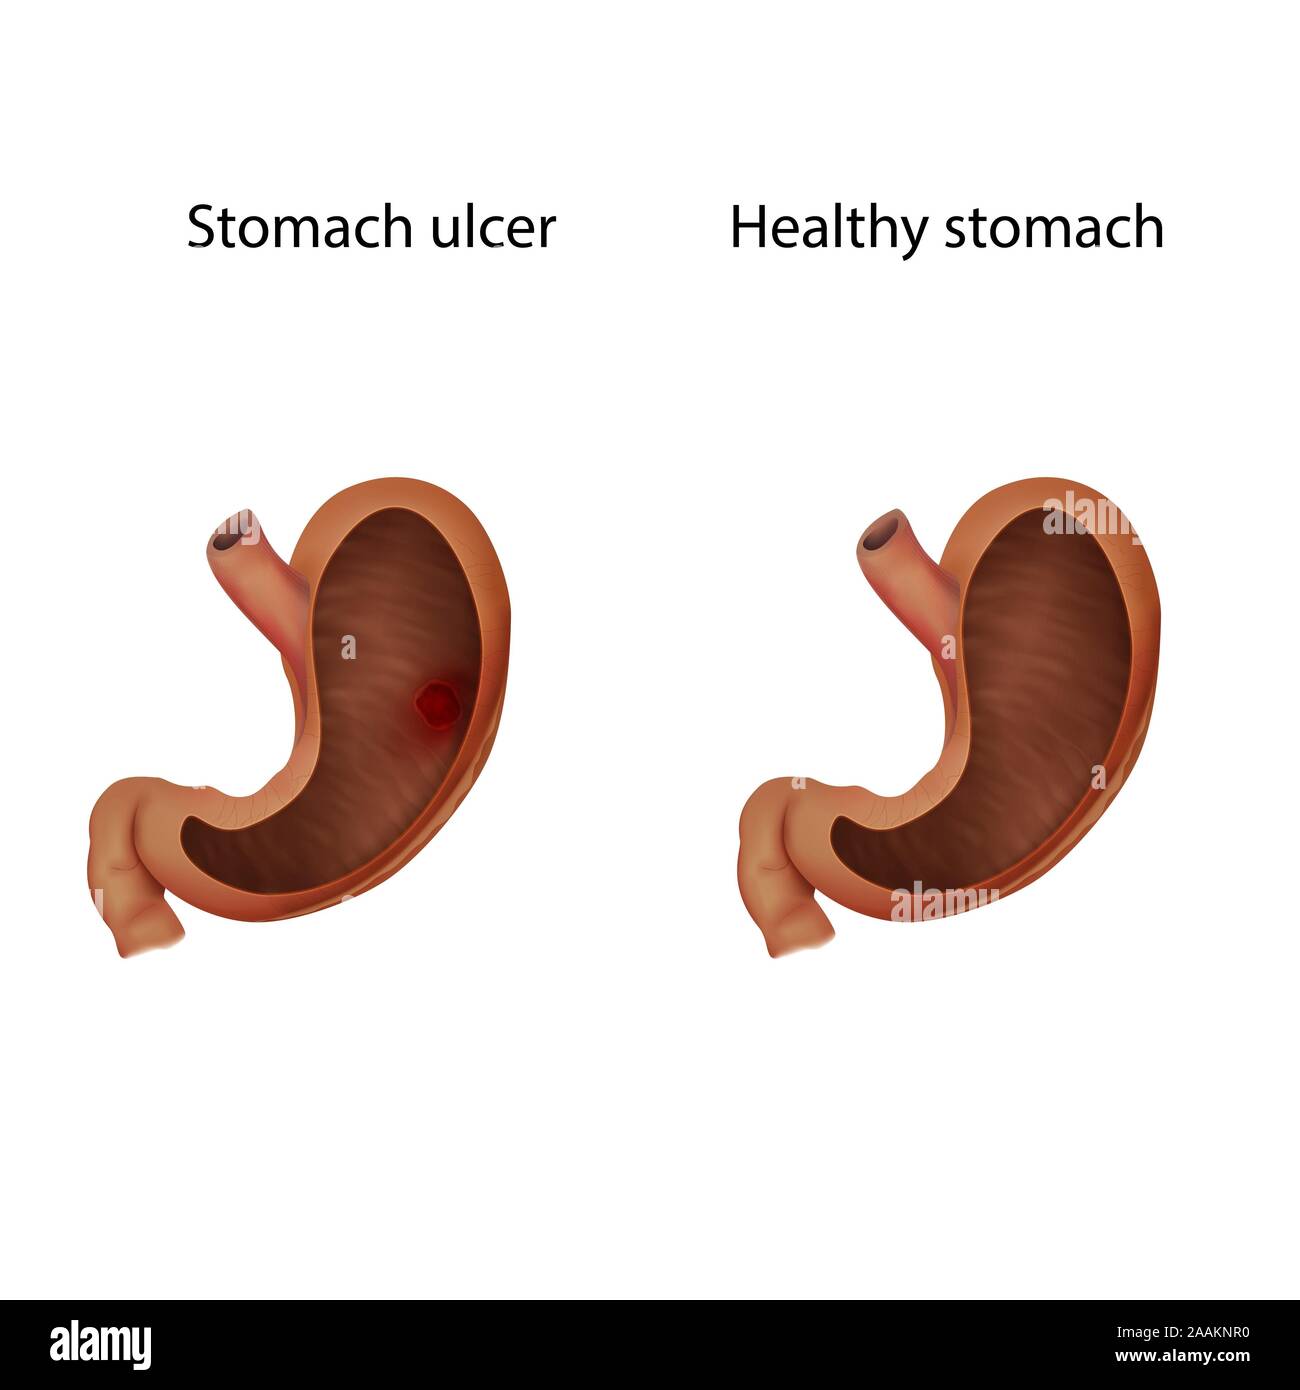 Stomach ulcer and healthy stomach, illustration. Stock Photo